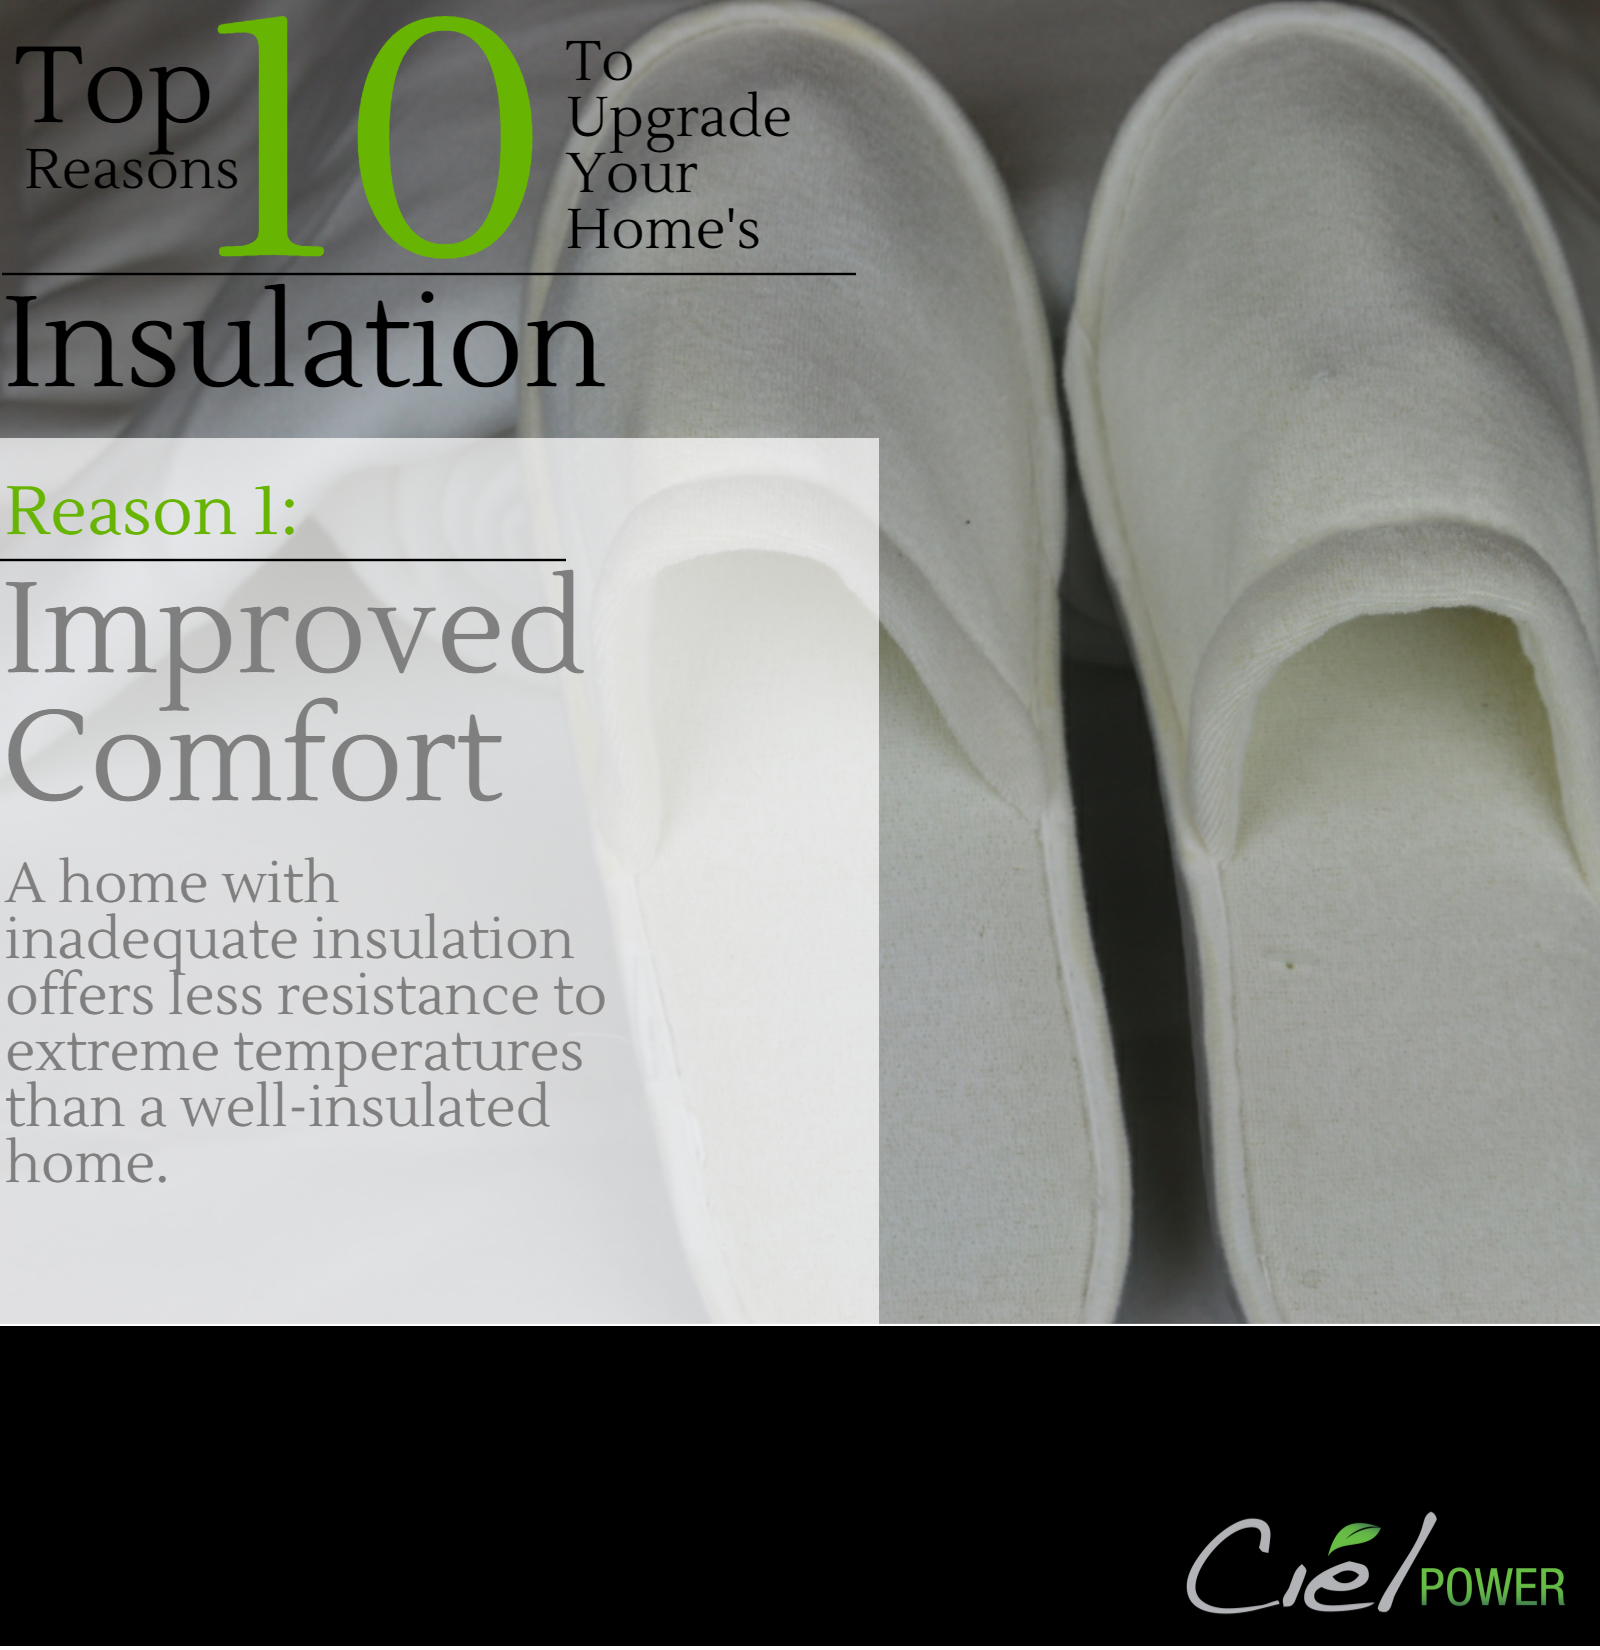 Top 10 Reasons to Upgrade Your Home's Insulation